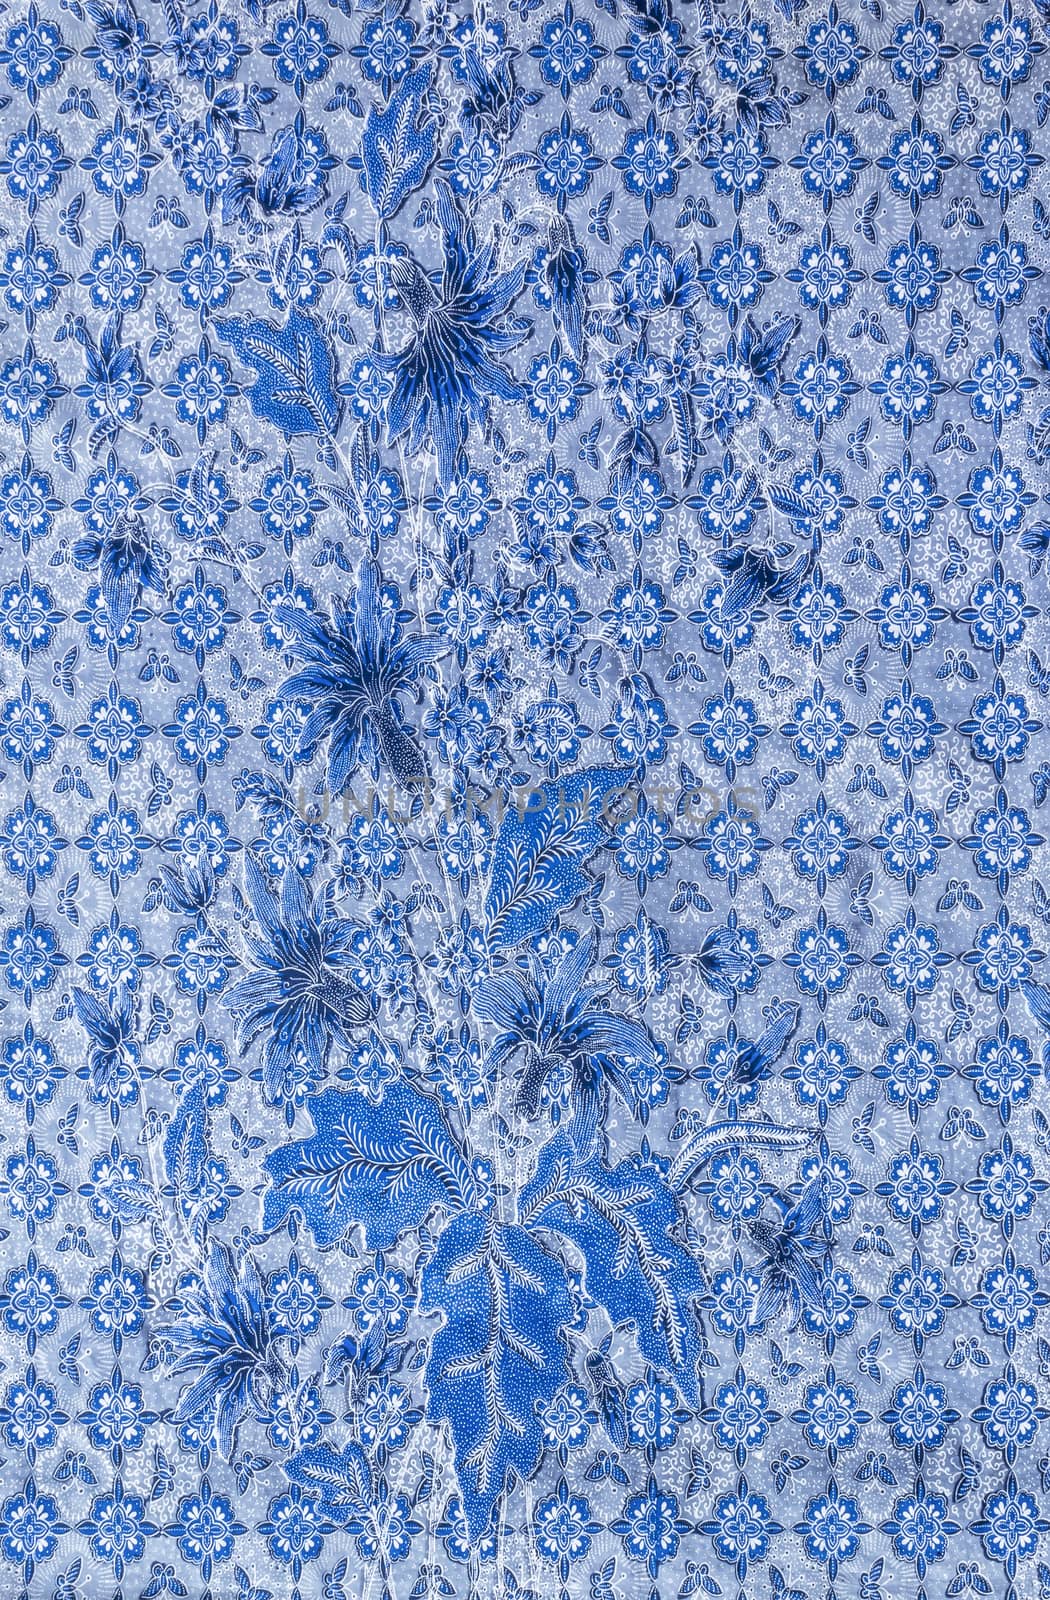 Blue fabric pattern by manusy